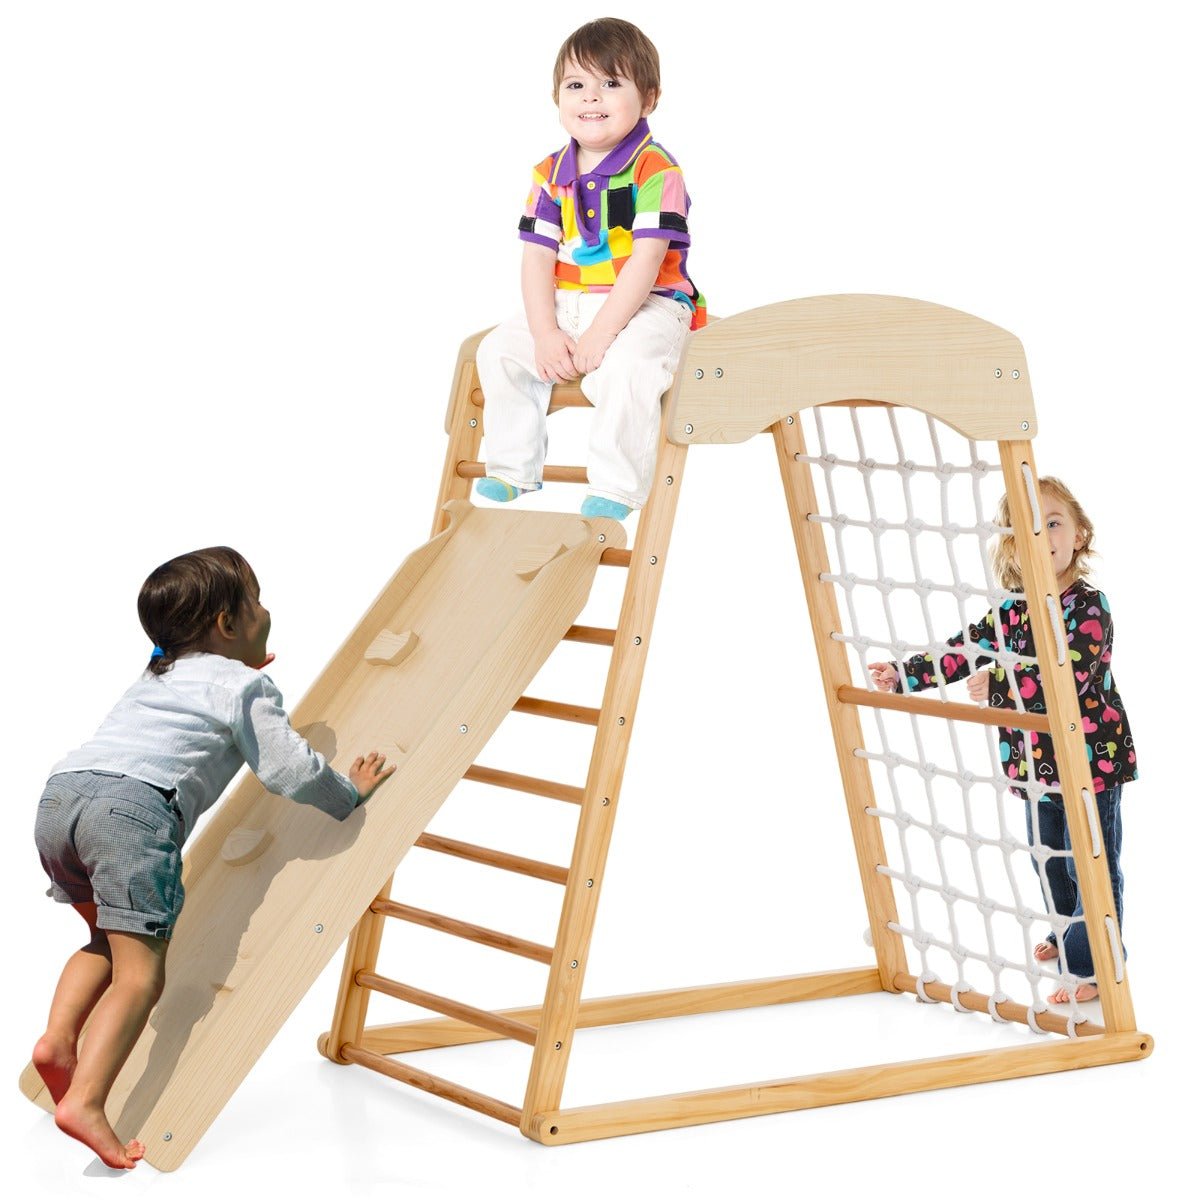 Multi-Activity Jungle Gym for Kids with Ramp